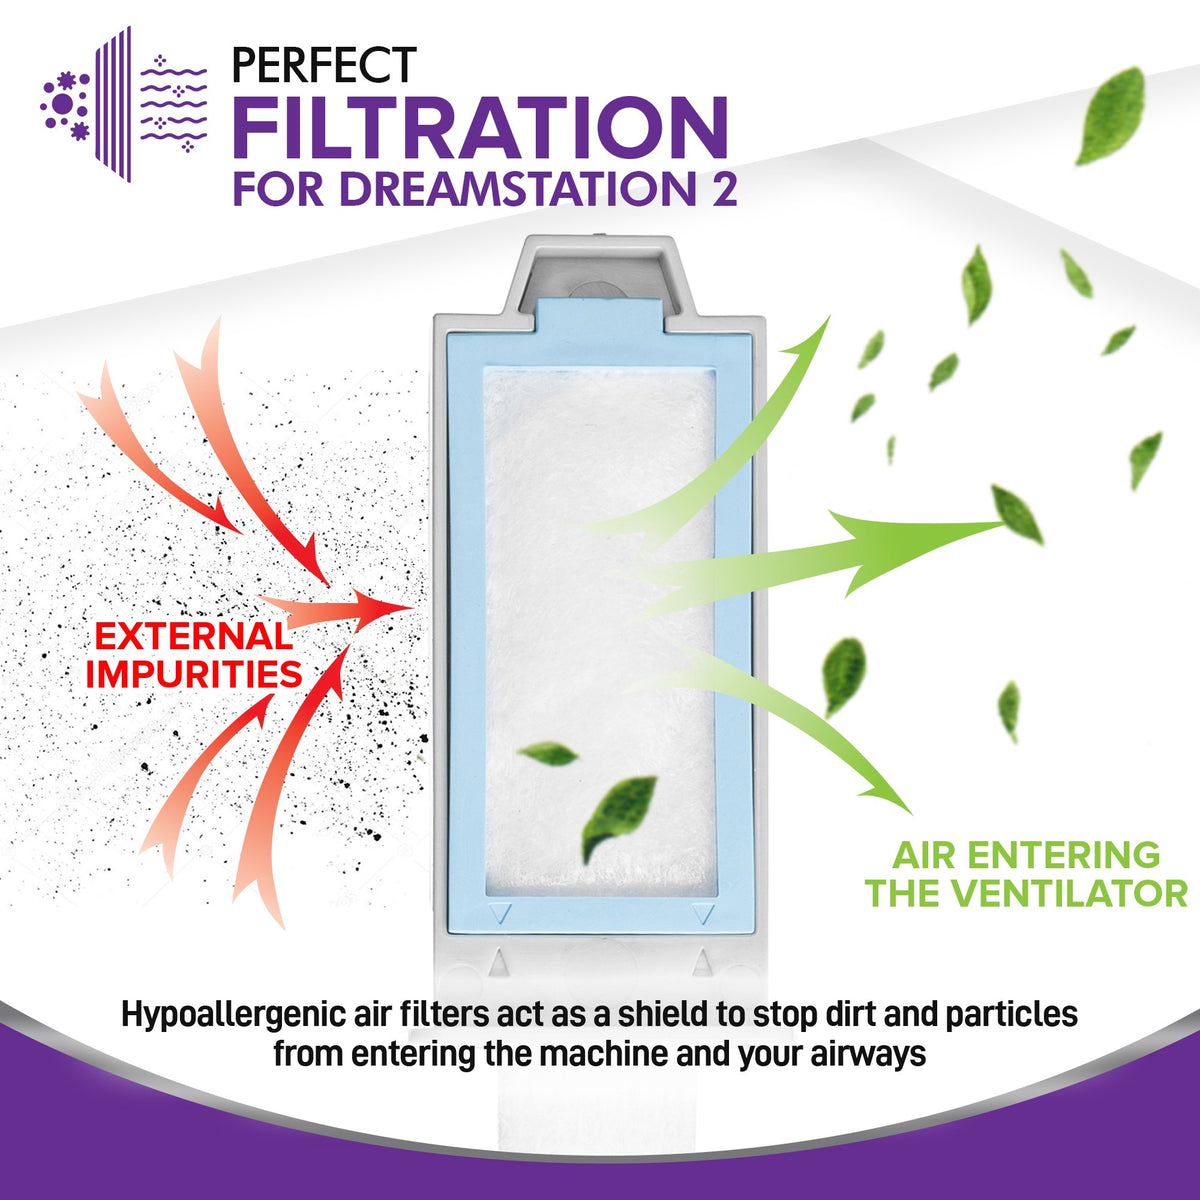 DreamStation 2 Filter Kit, Replacement Filters, Reusable Pollen Filters, and Disposable Ultra-Fine Filters Kit for Dream Station 2 CPAP Machine